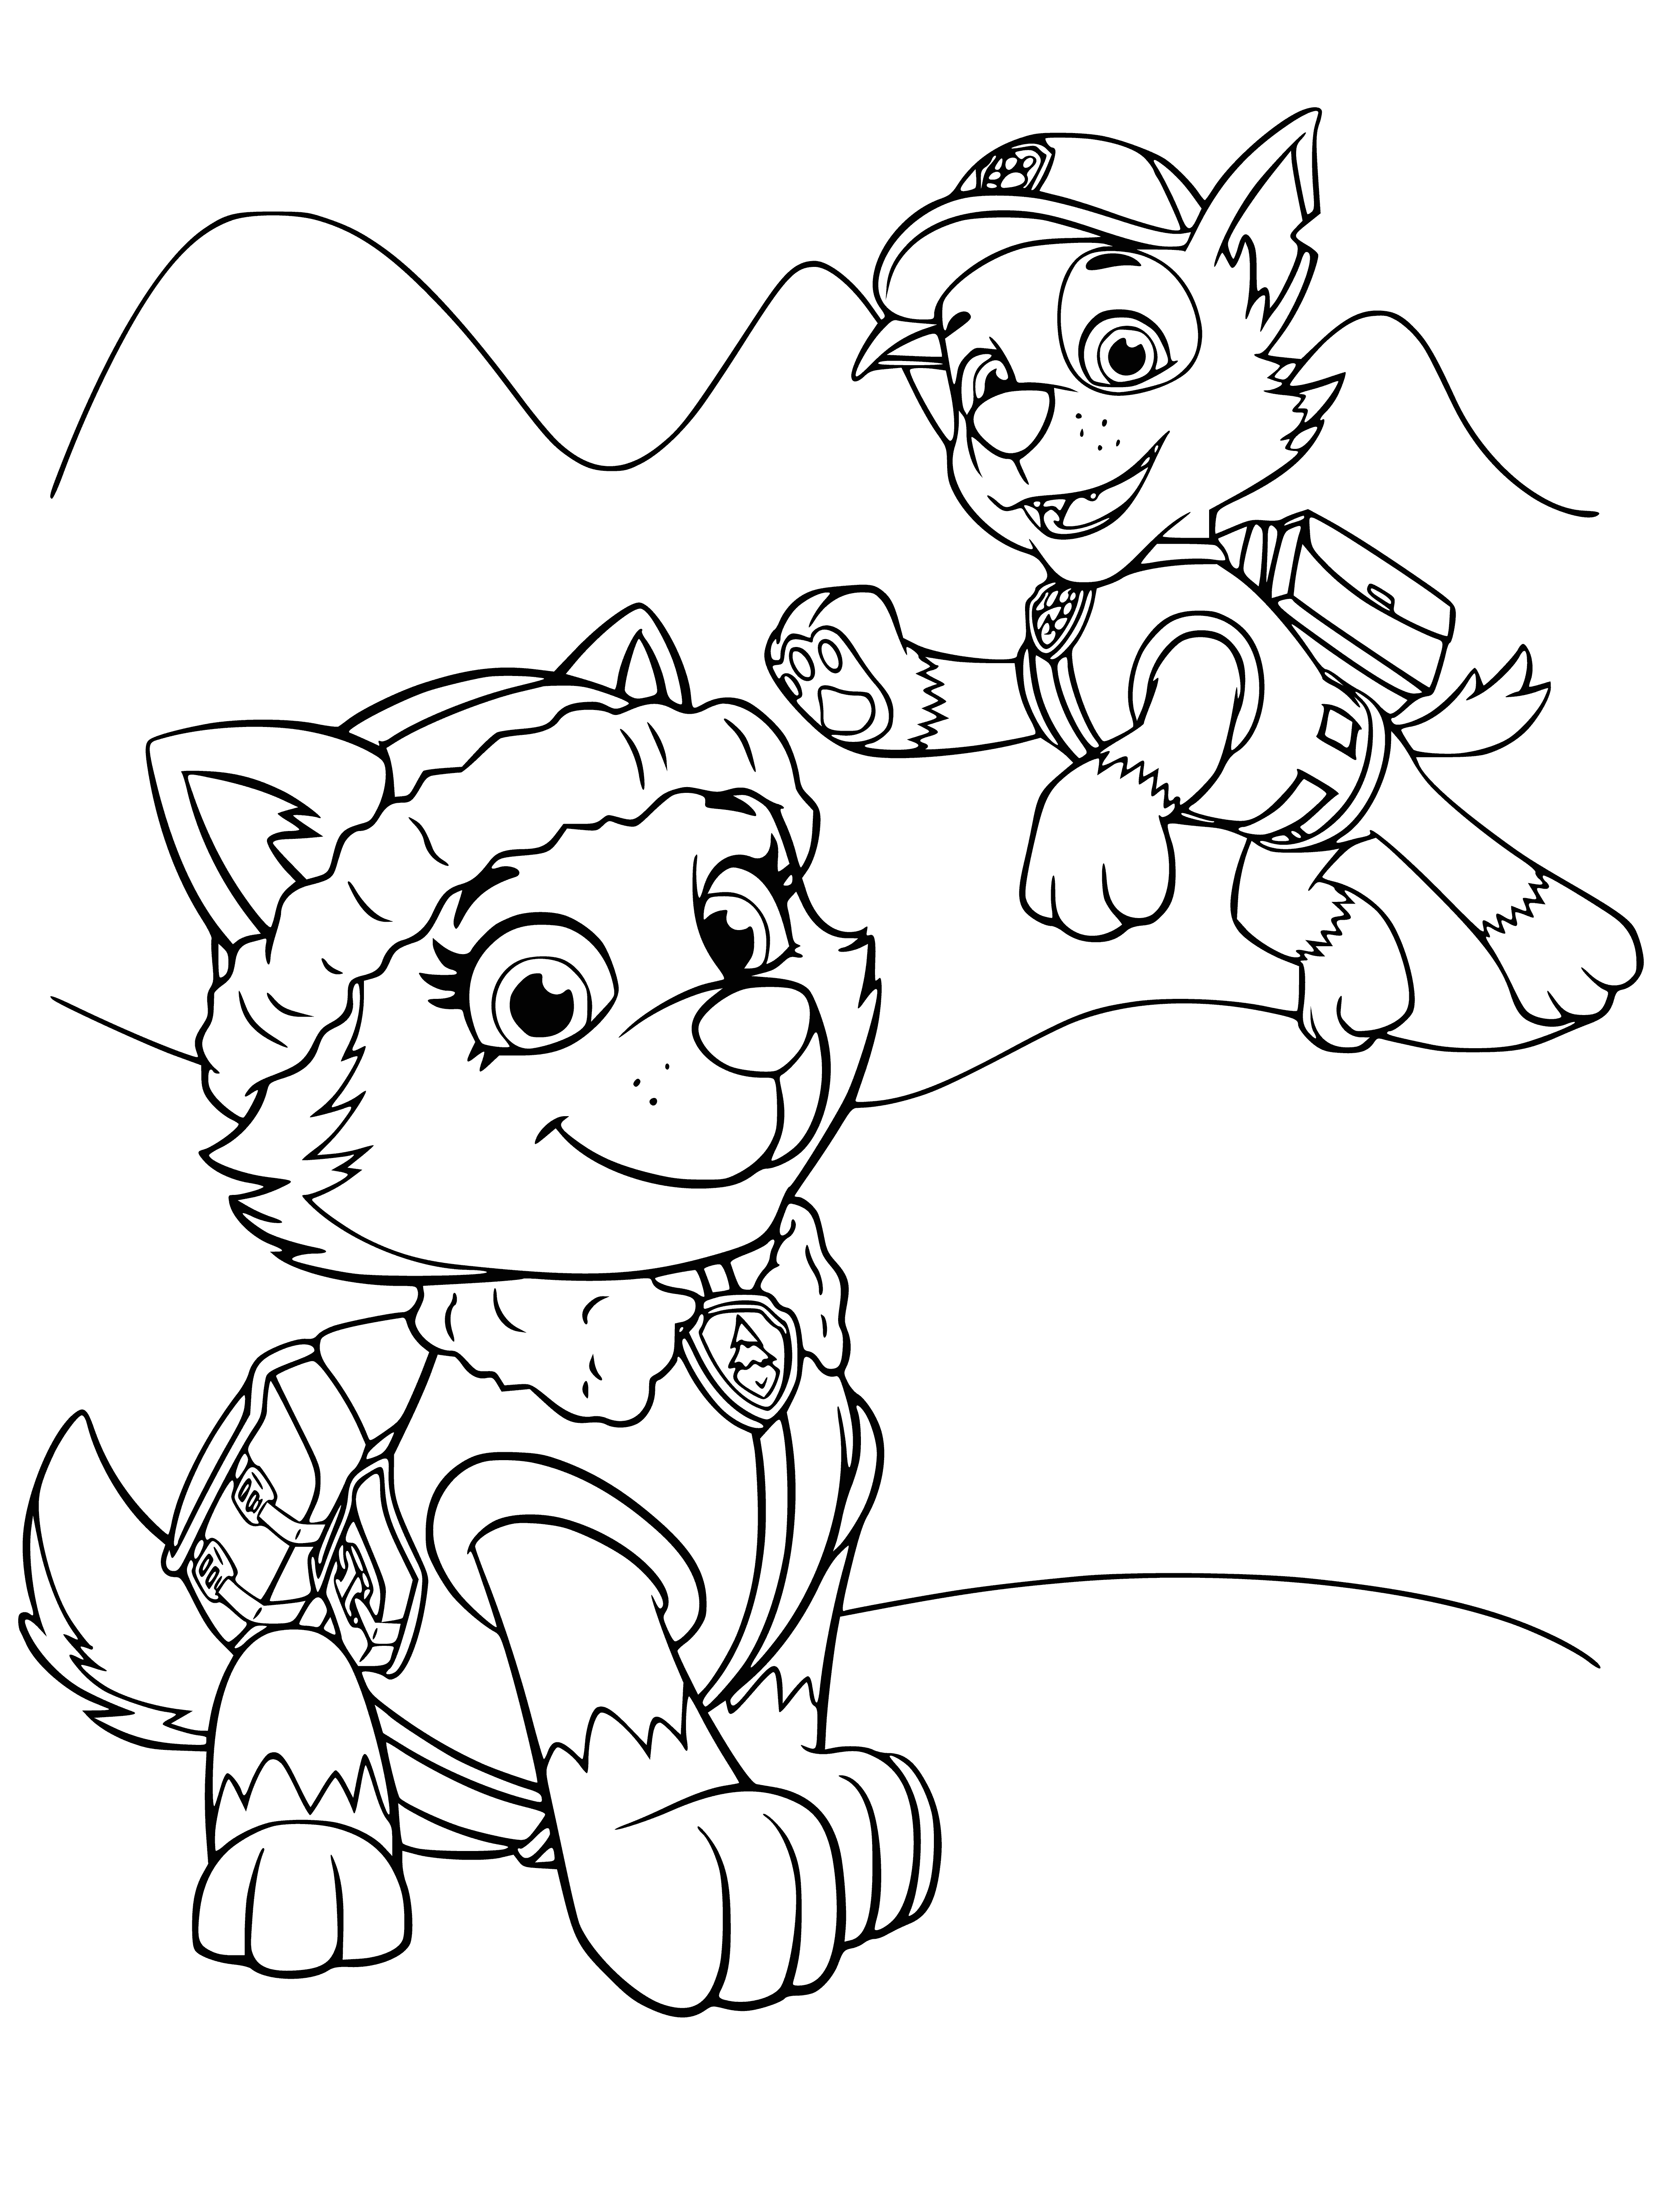 coloring page: Two pups on frozen lake: one wearing blue scarf/backpack, holding rope. Other wearing pink harness, standing by block of ice.